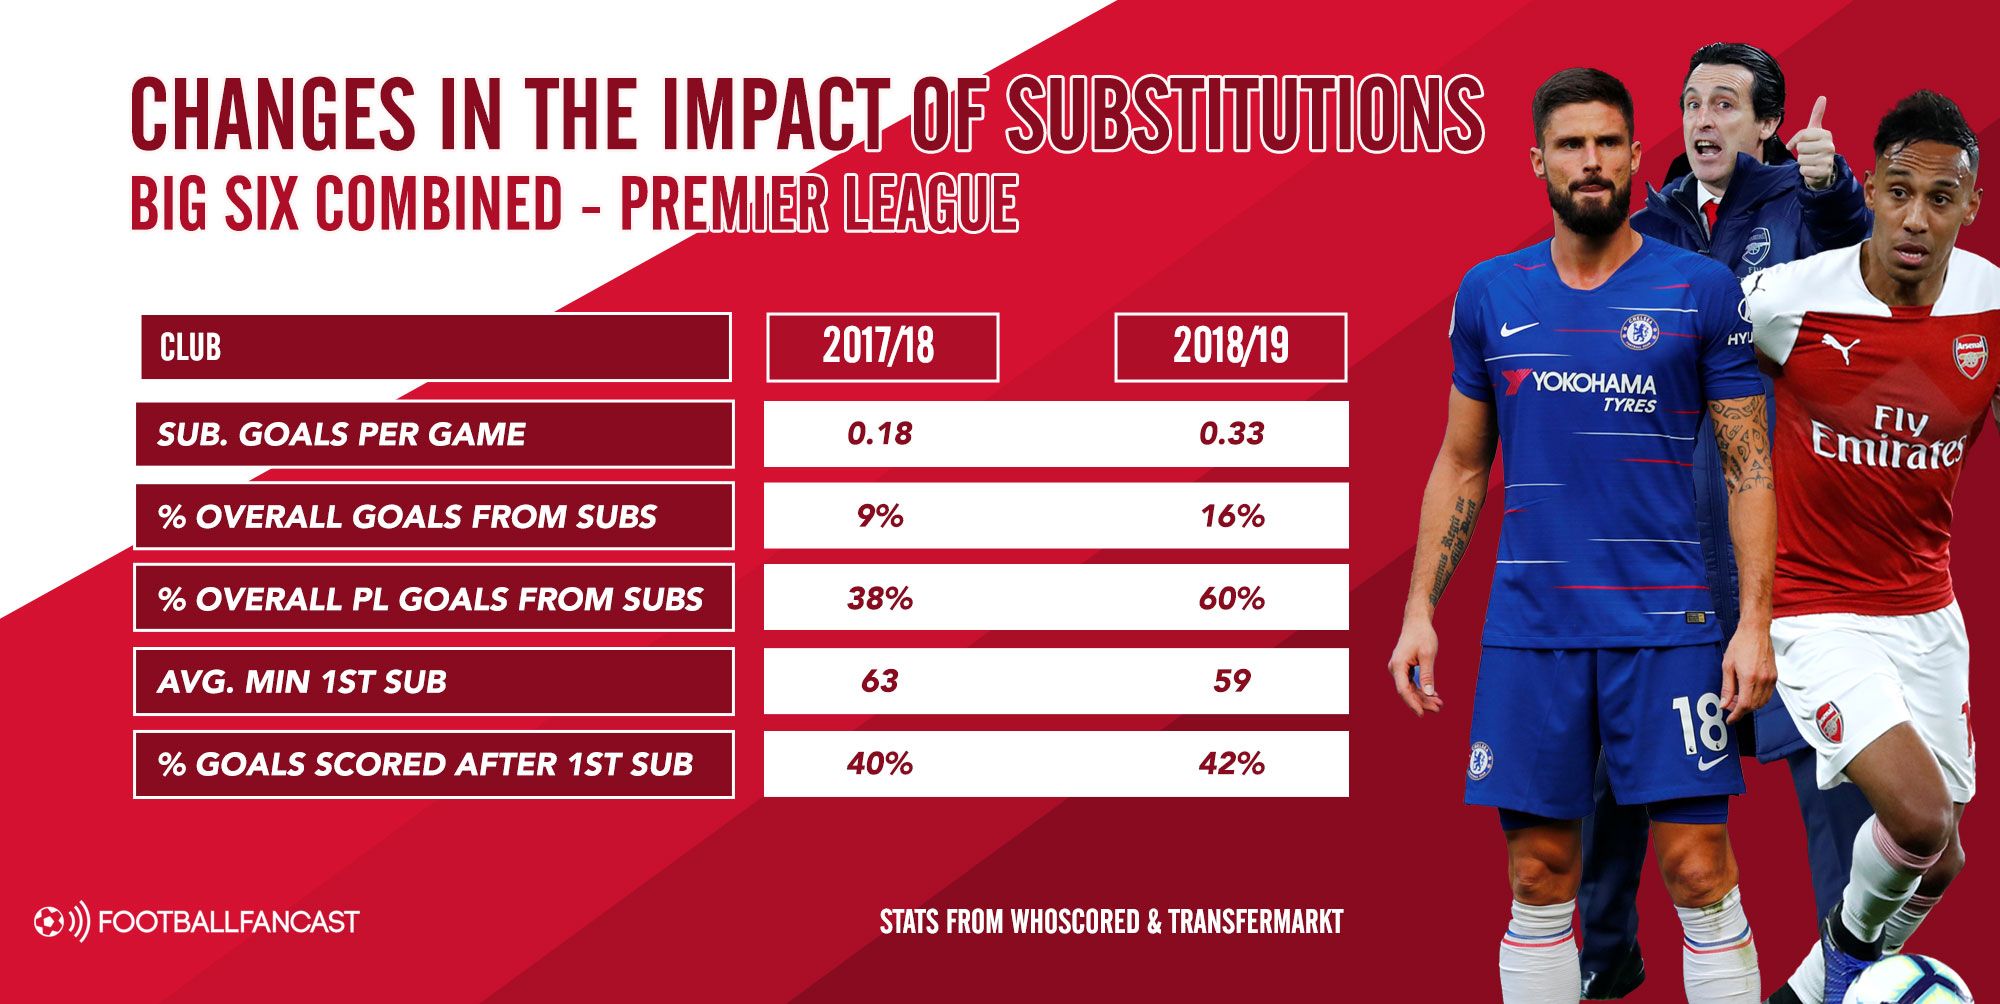 Changes in impact of subs - Big Six